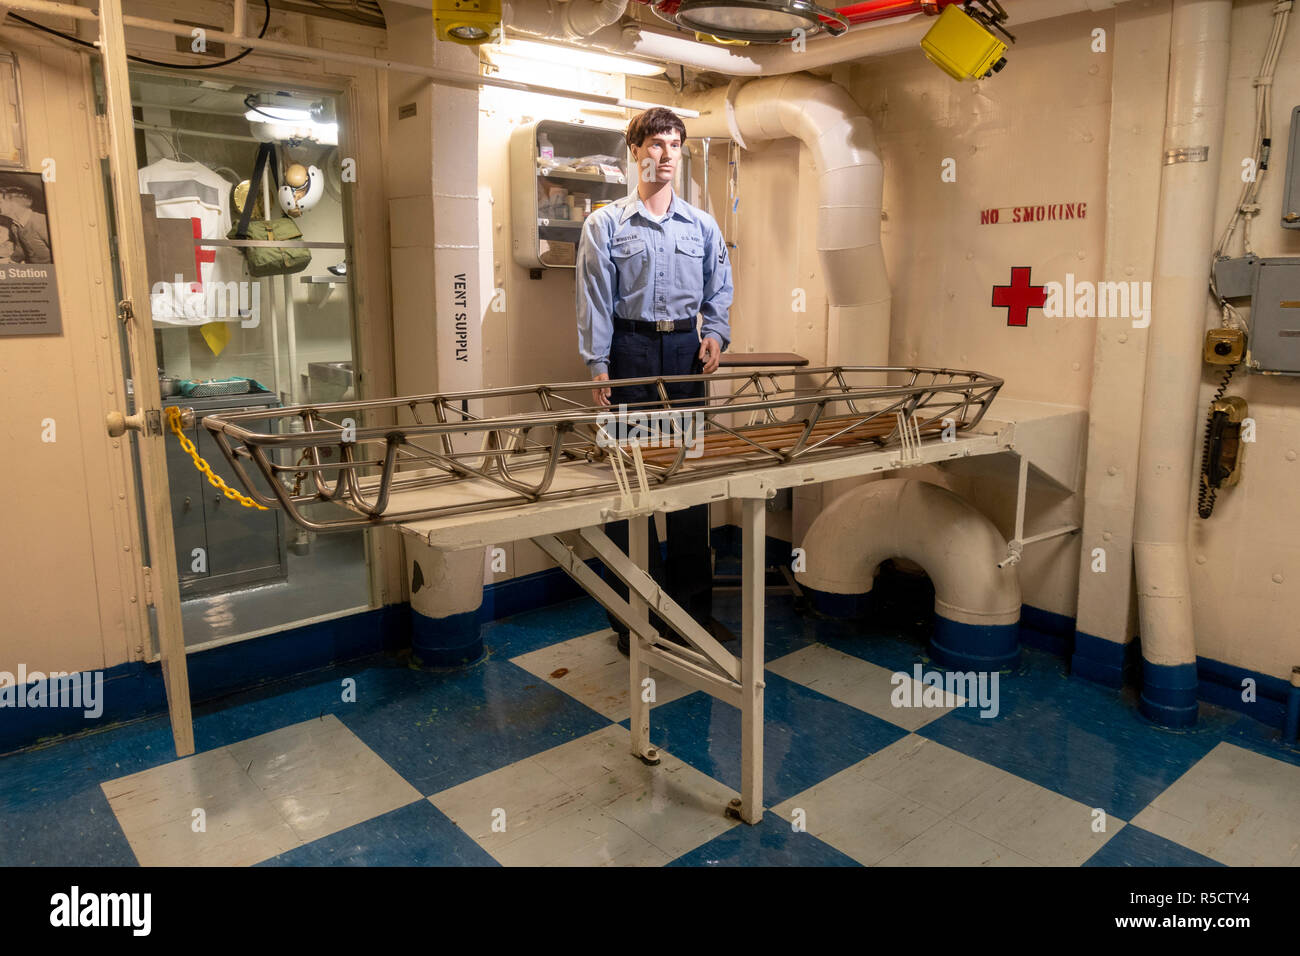 Battle dressing station, USS Midway Museum, San Diego, California, United States. Stock Photo